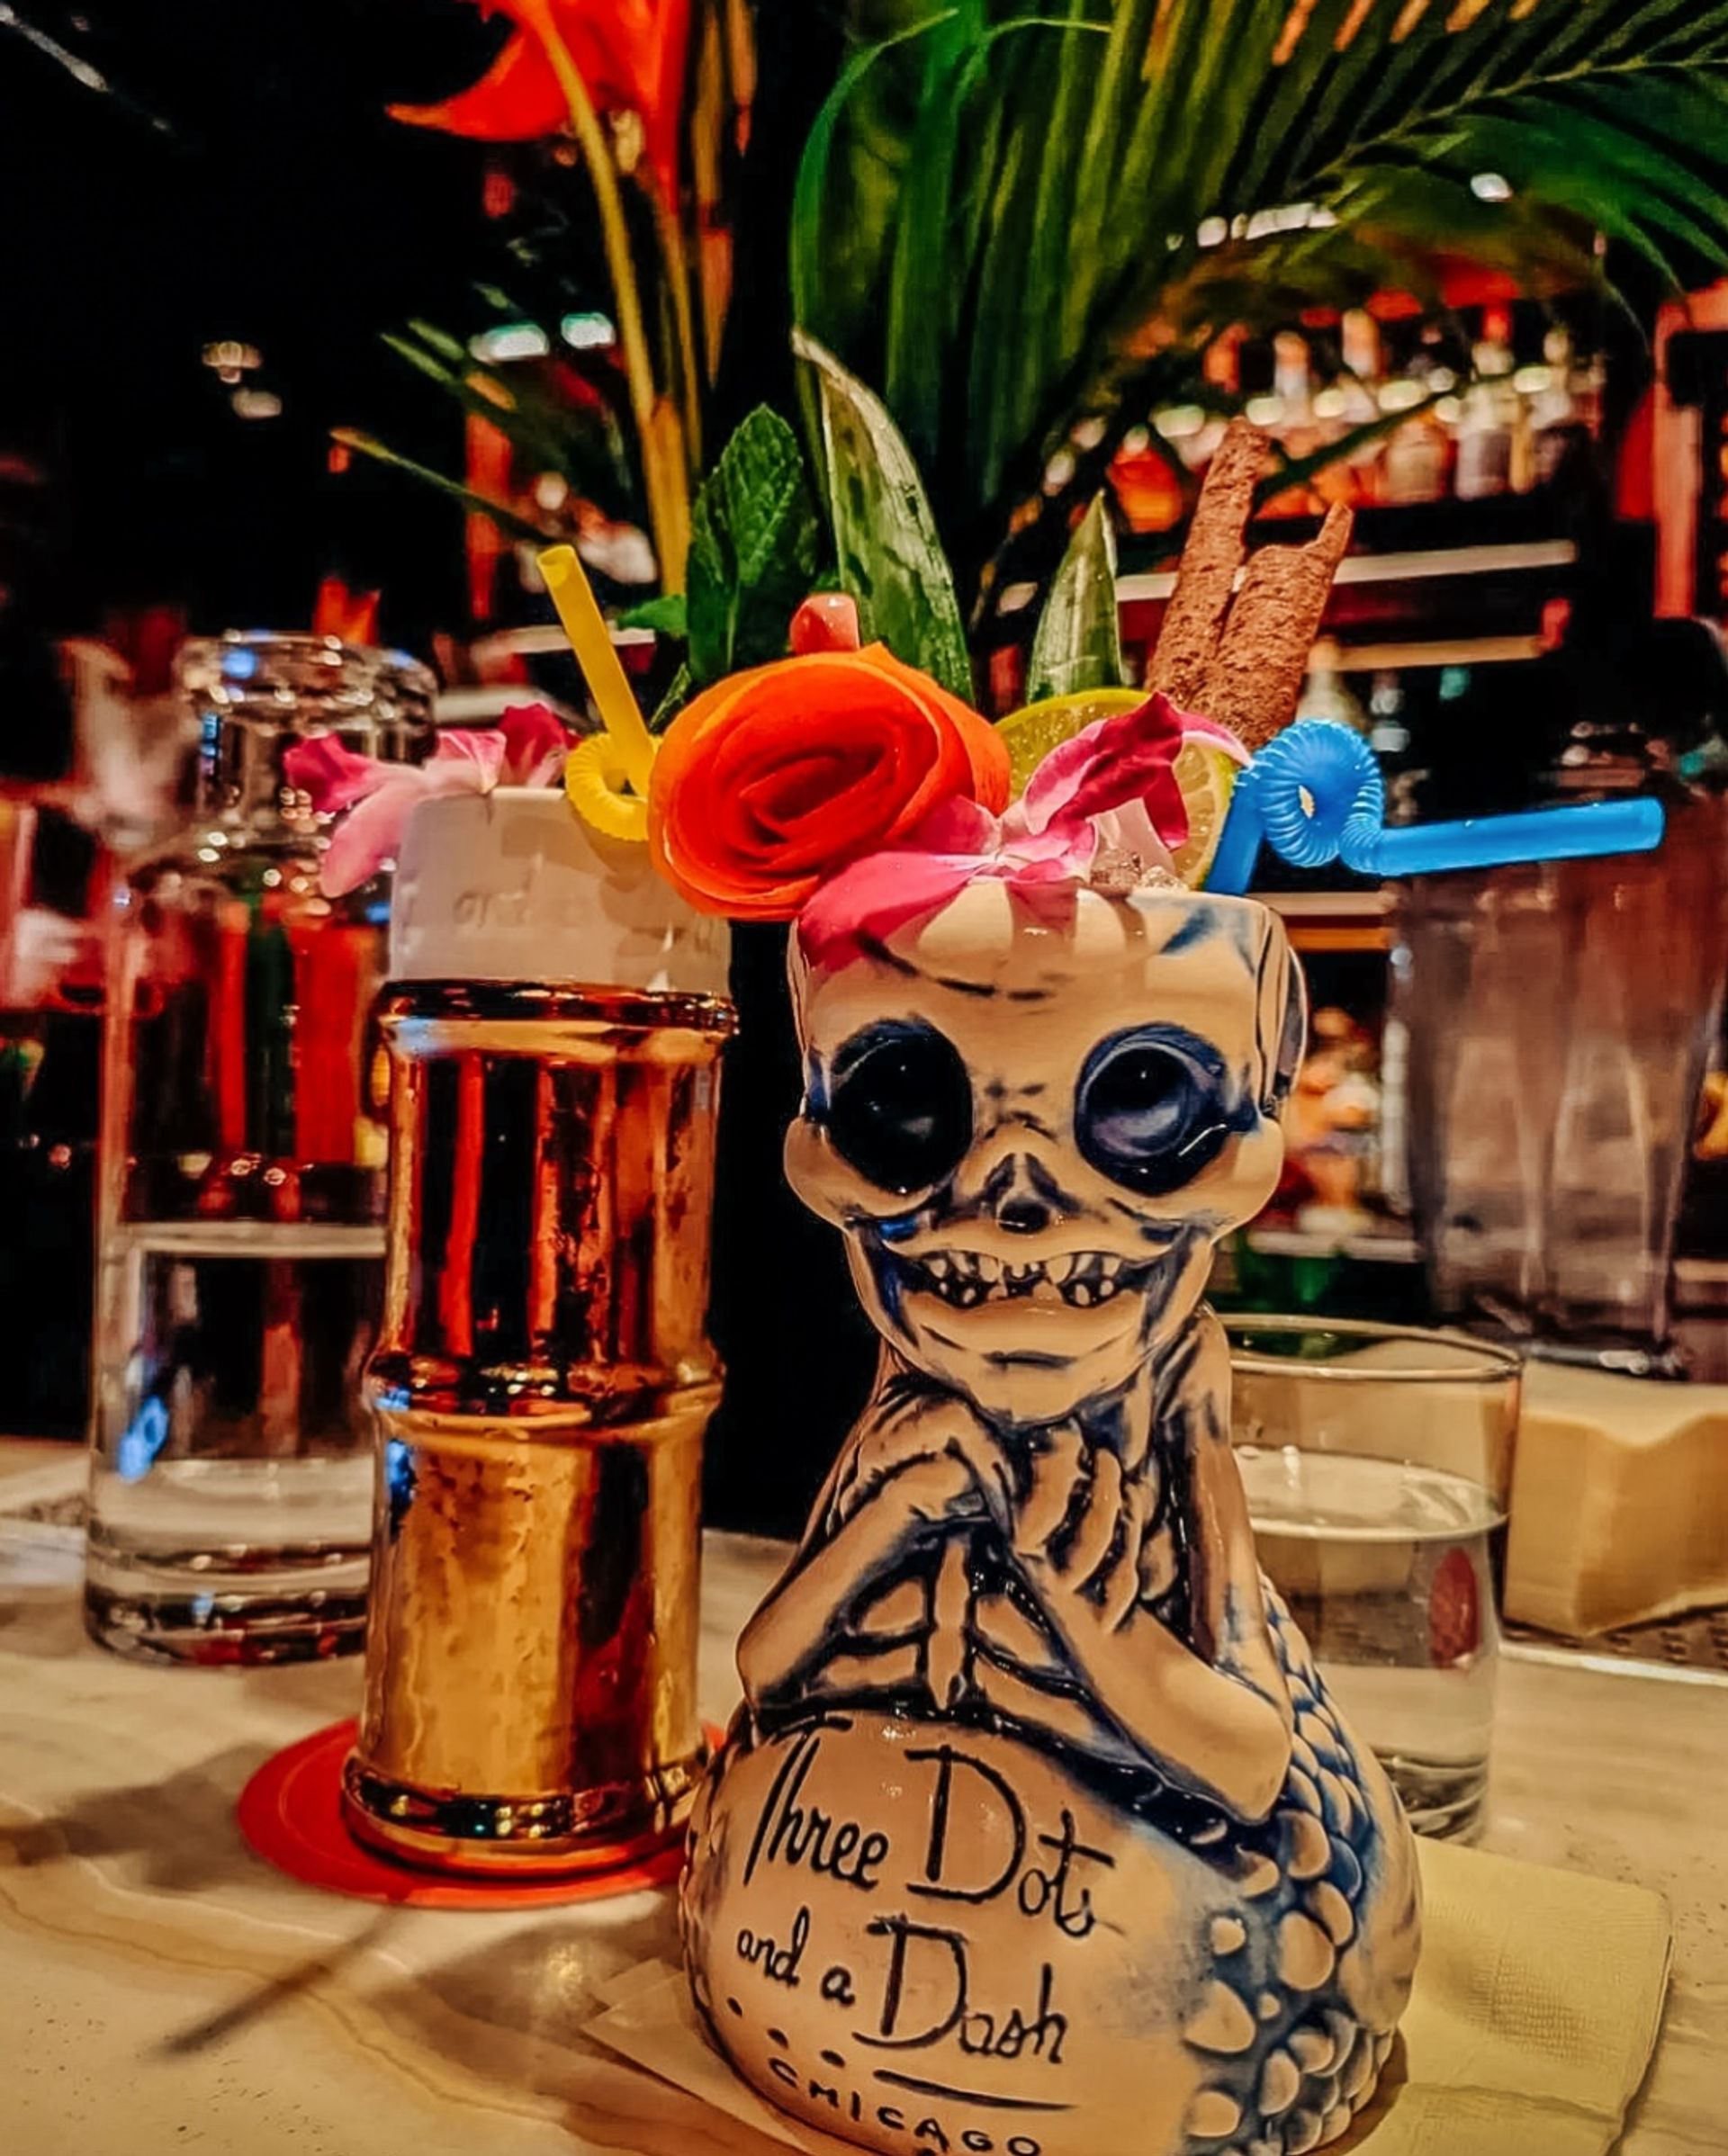 Insta-Worthy Tiki Cocktail Bar Dining & Drinks Experience at Three Dots and a Dash image 2